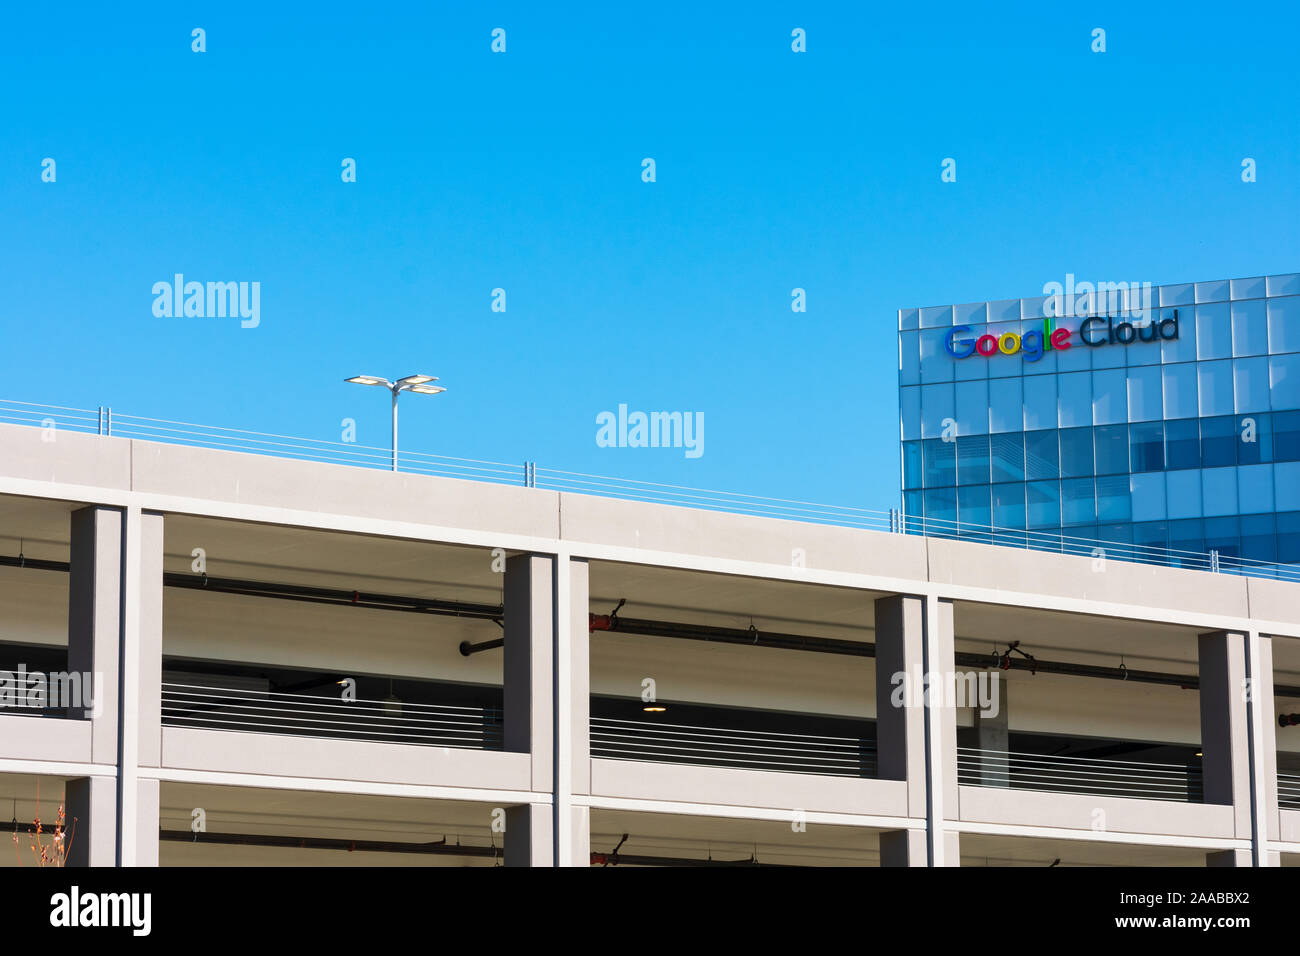 Multi level parking garage for Google employees in front of Google Cloud office building - Sunnyvale, California, USA - 2019 Stock Photo